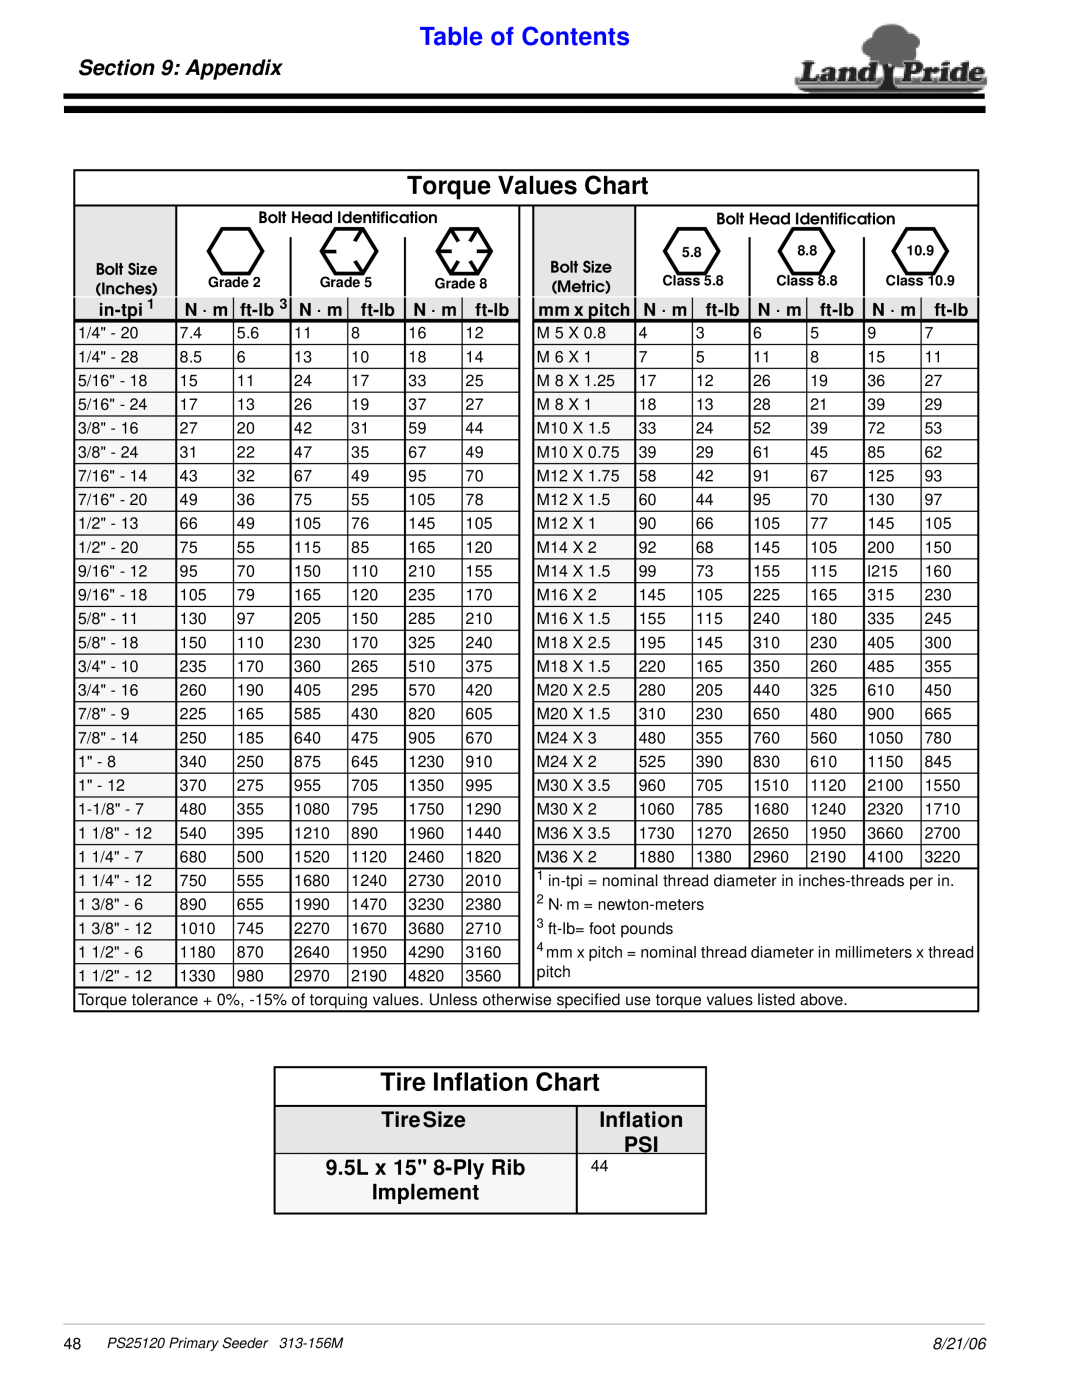 Land Pride PS25120 Torque Values Chart, Tire Inflation Chart, Appendix, Tire Size, 9.5L x 15 8-PlyRib, Implement, in-tpi 